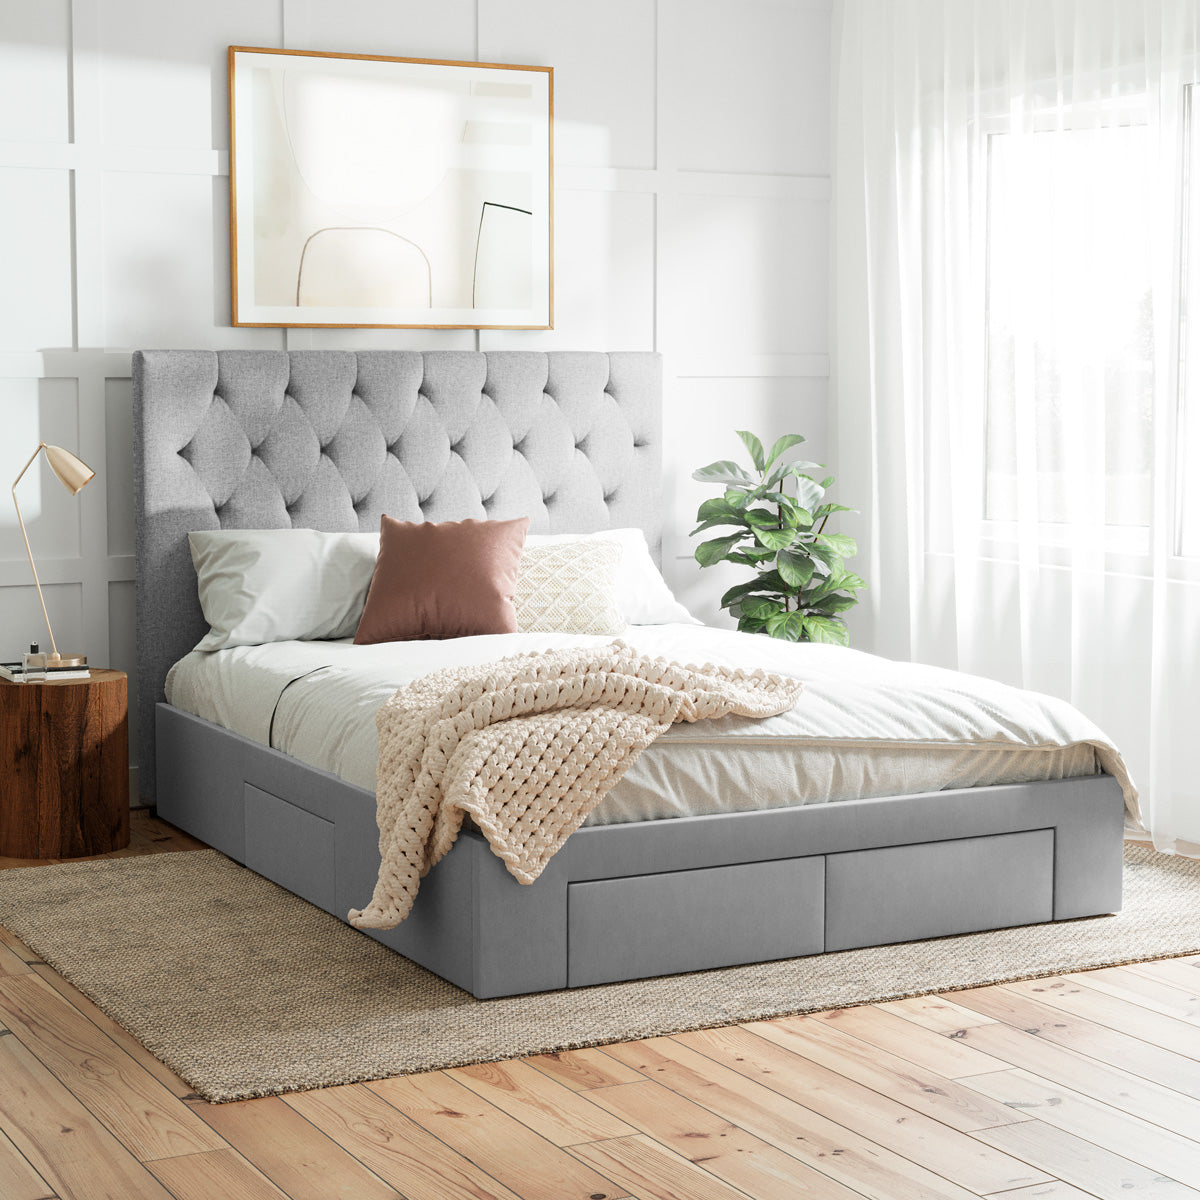 Fenwick Bed Frame with Four Storage Drawers (Grey Fabric)